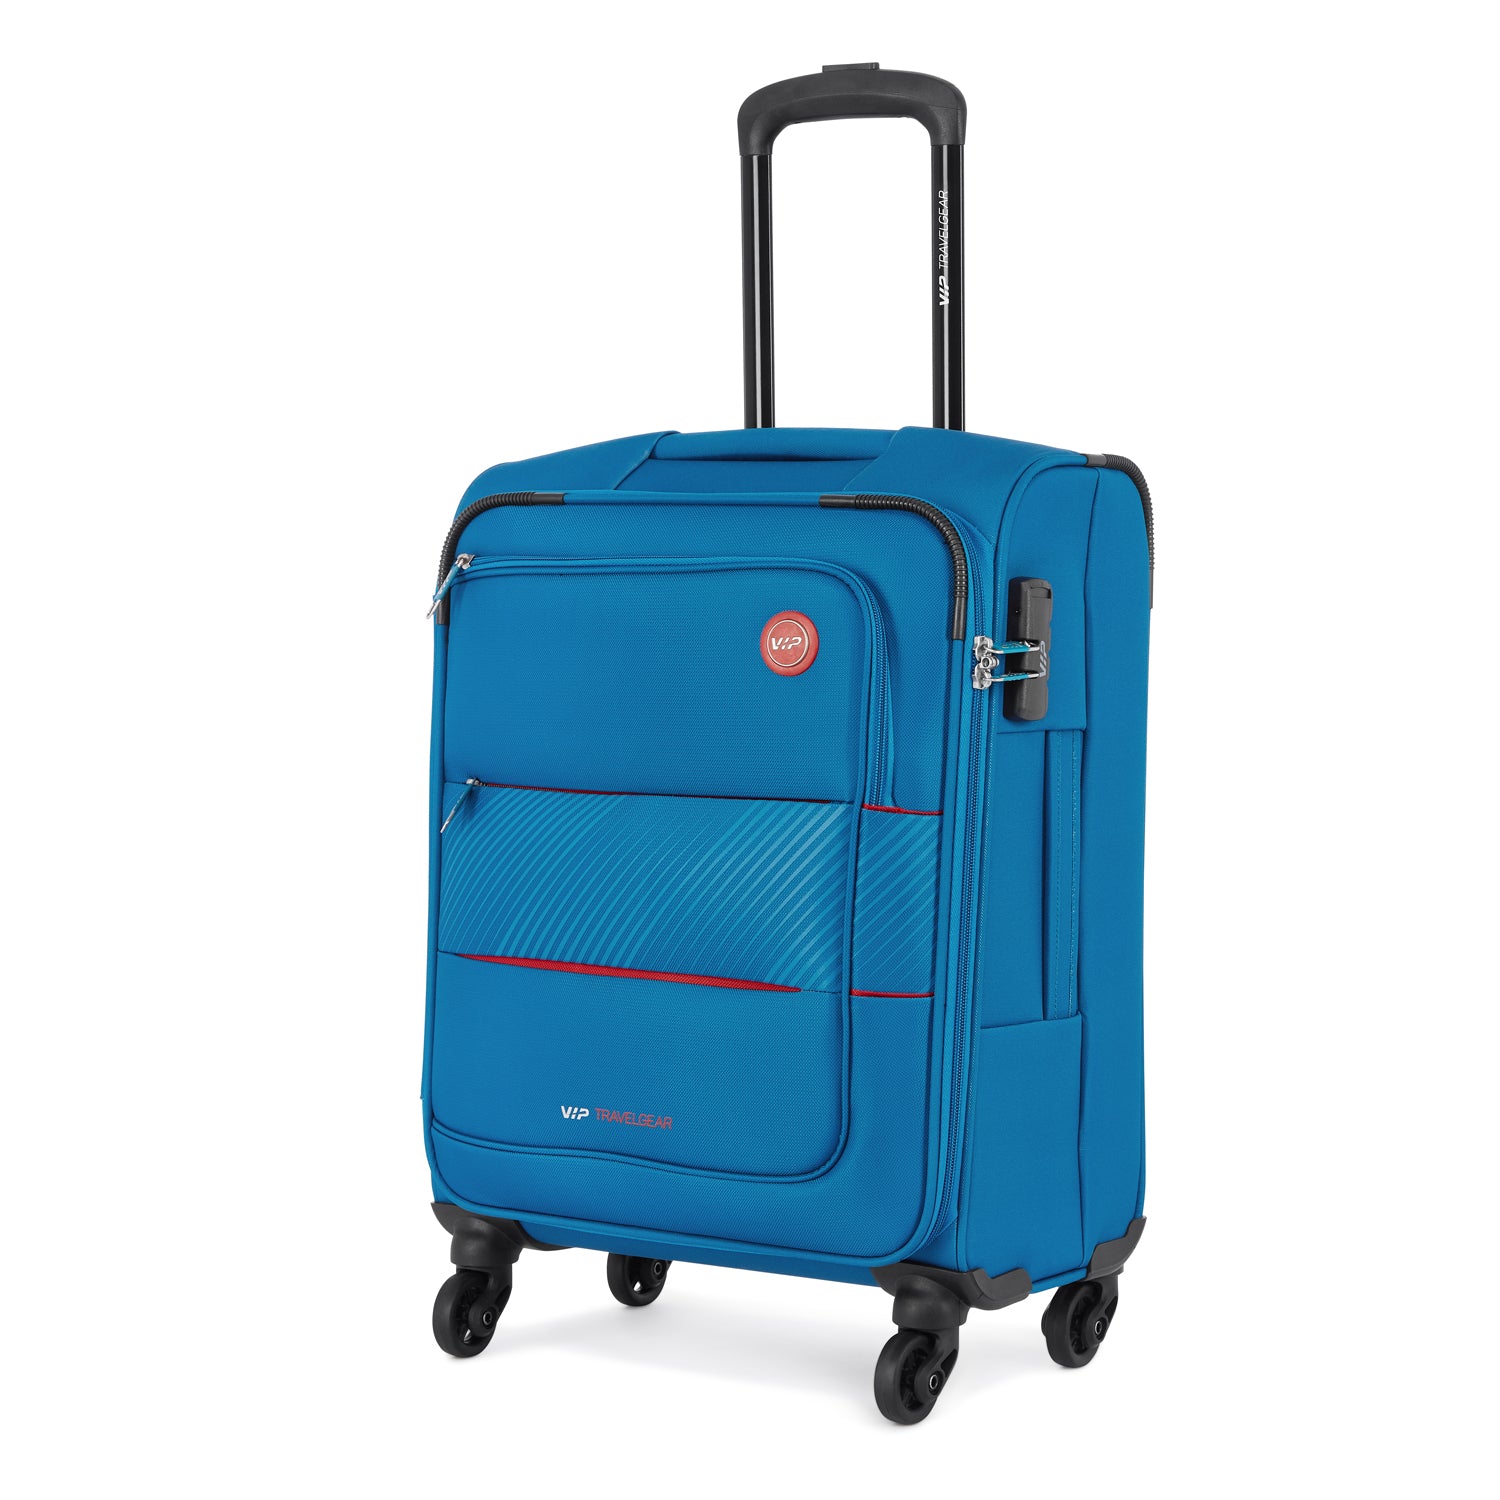 VIP Hard Trolley Bag Medium Size | 8 Wheel Polyester Luggage Bag 65 cm with  TSA Lock | Durable Check in Suitcase for Travel (Blue) : Amazon.in: Fashion